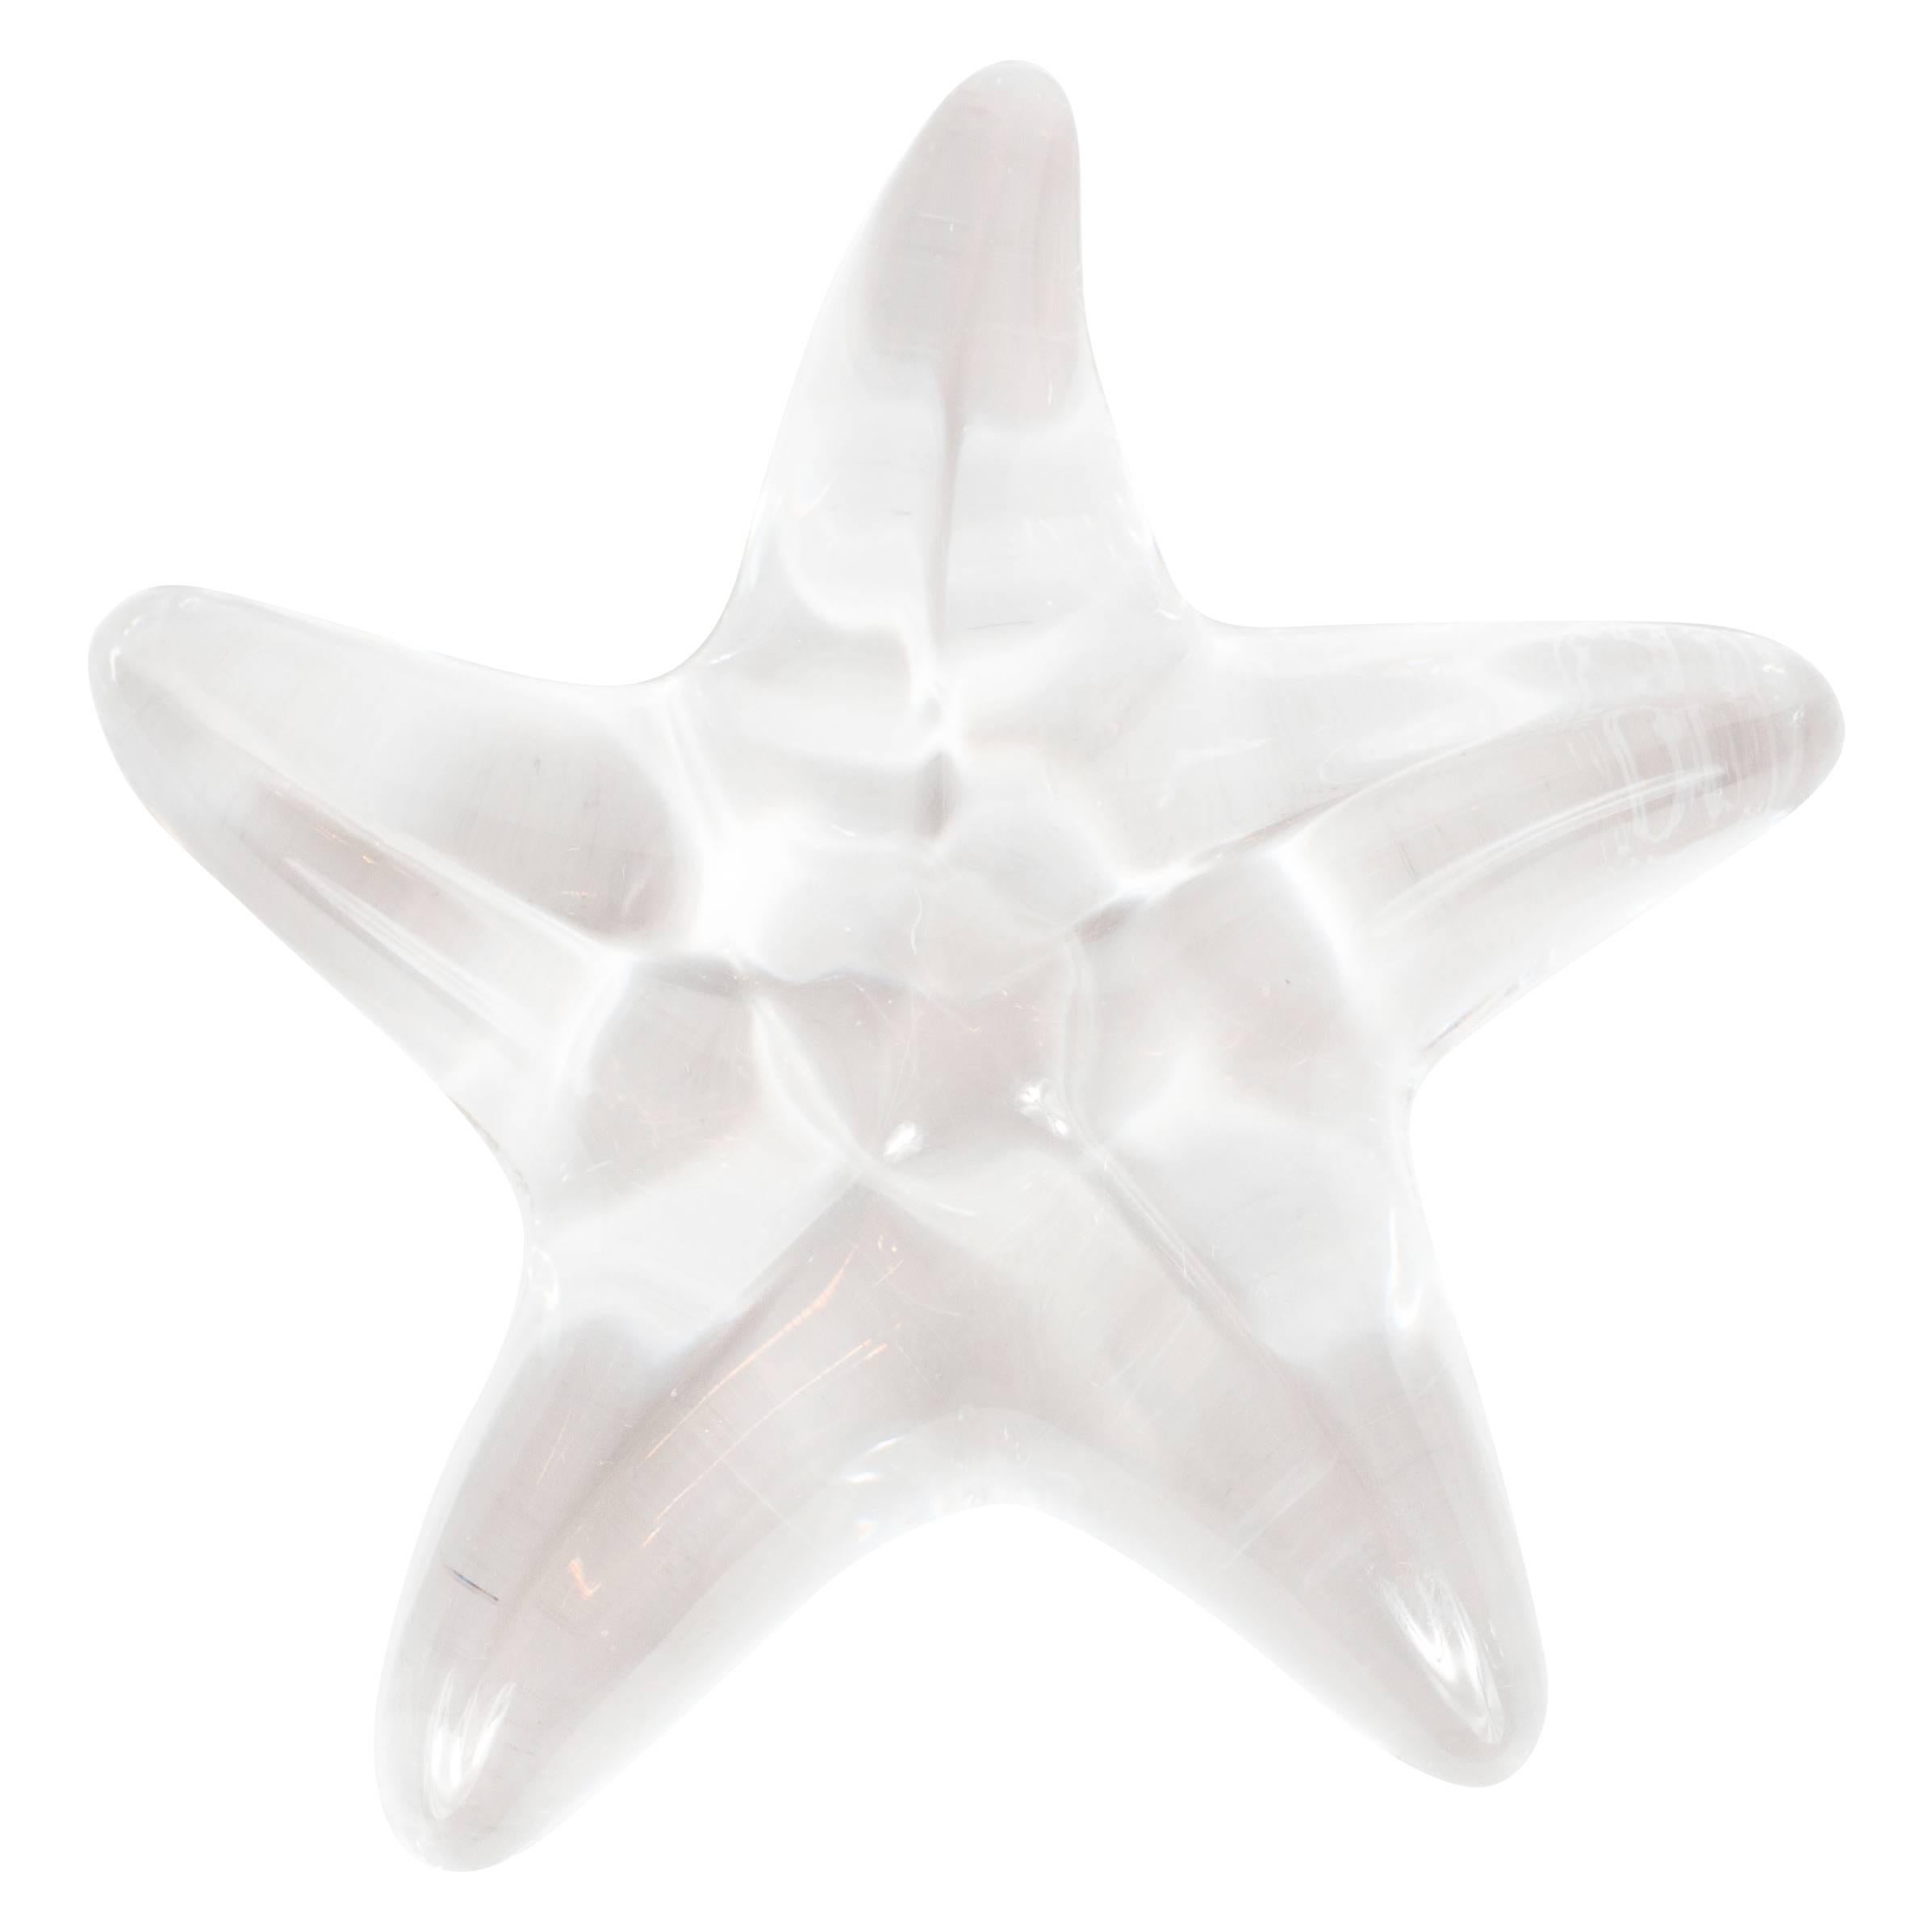 Midcentury Baccarat Starfish Objet or Paperweight